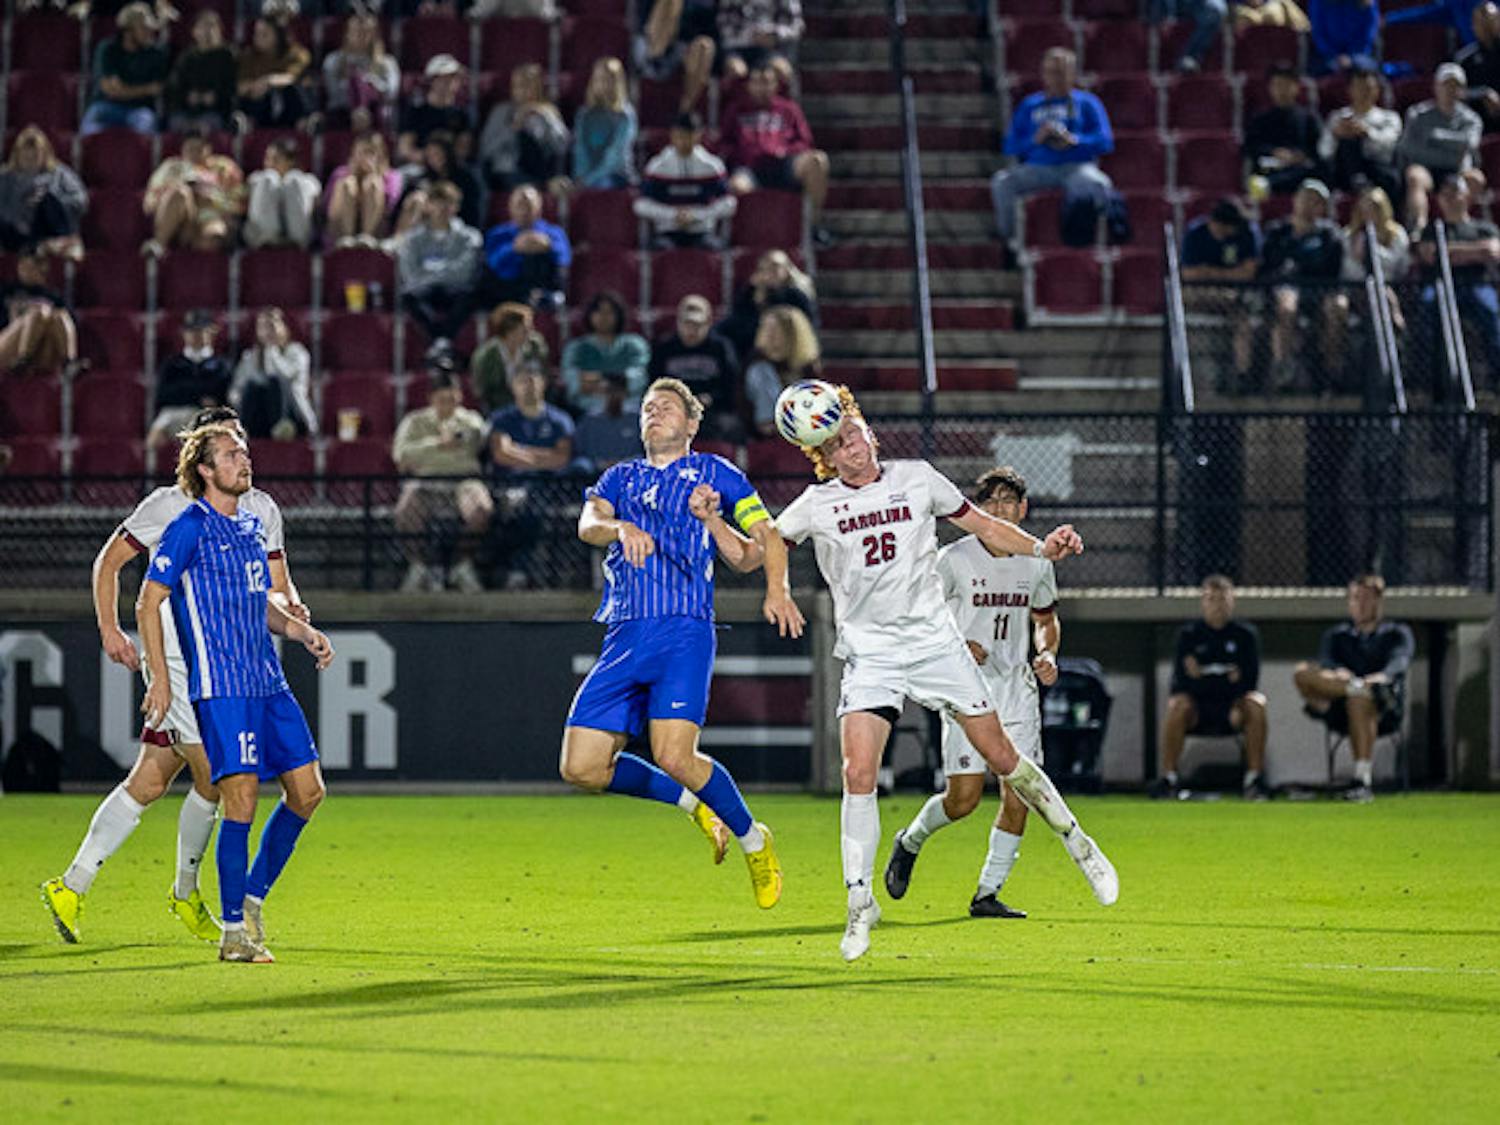 Junior forward Alex Luckhurst heads the ball during the South Carolina's game against Kentucky on Nov. 1, 2022. The Wildcats beat the Gamecocks 3-0.